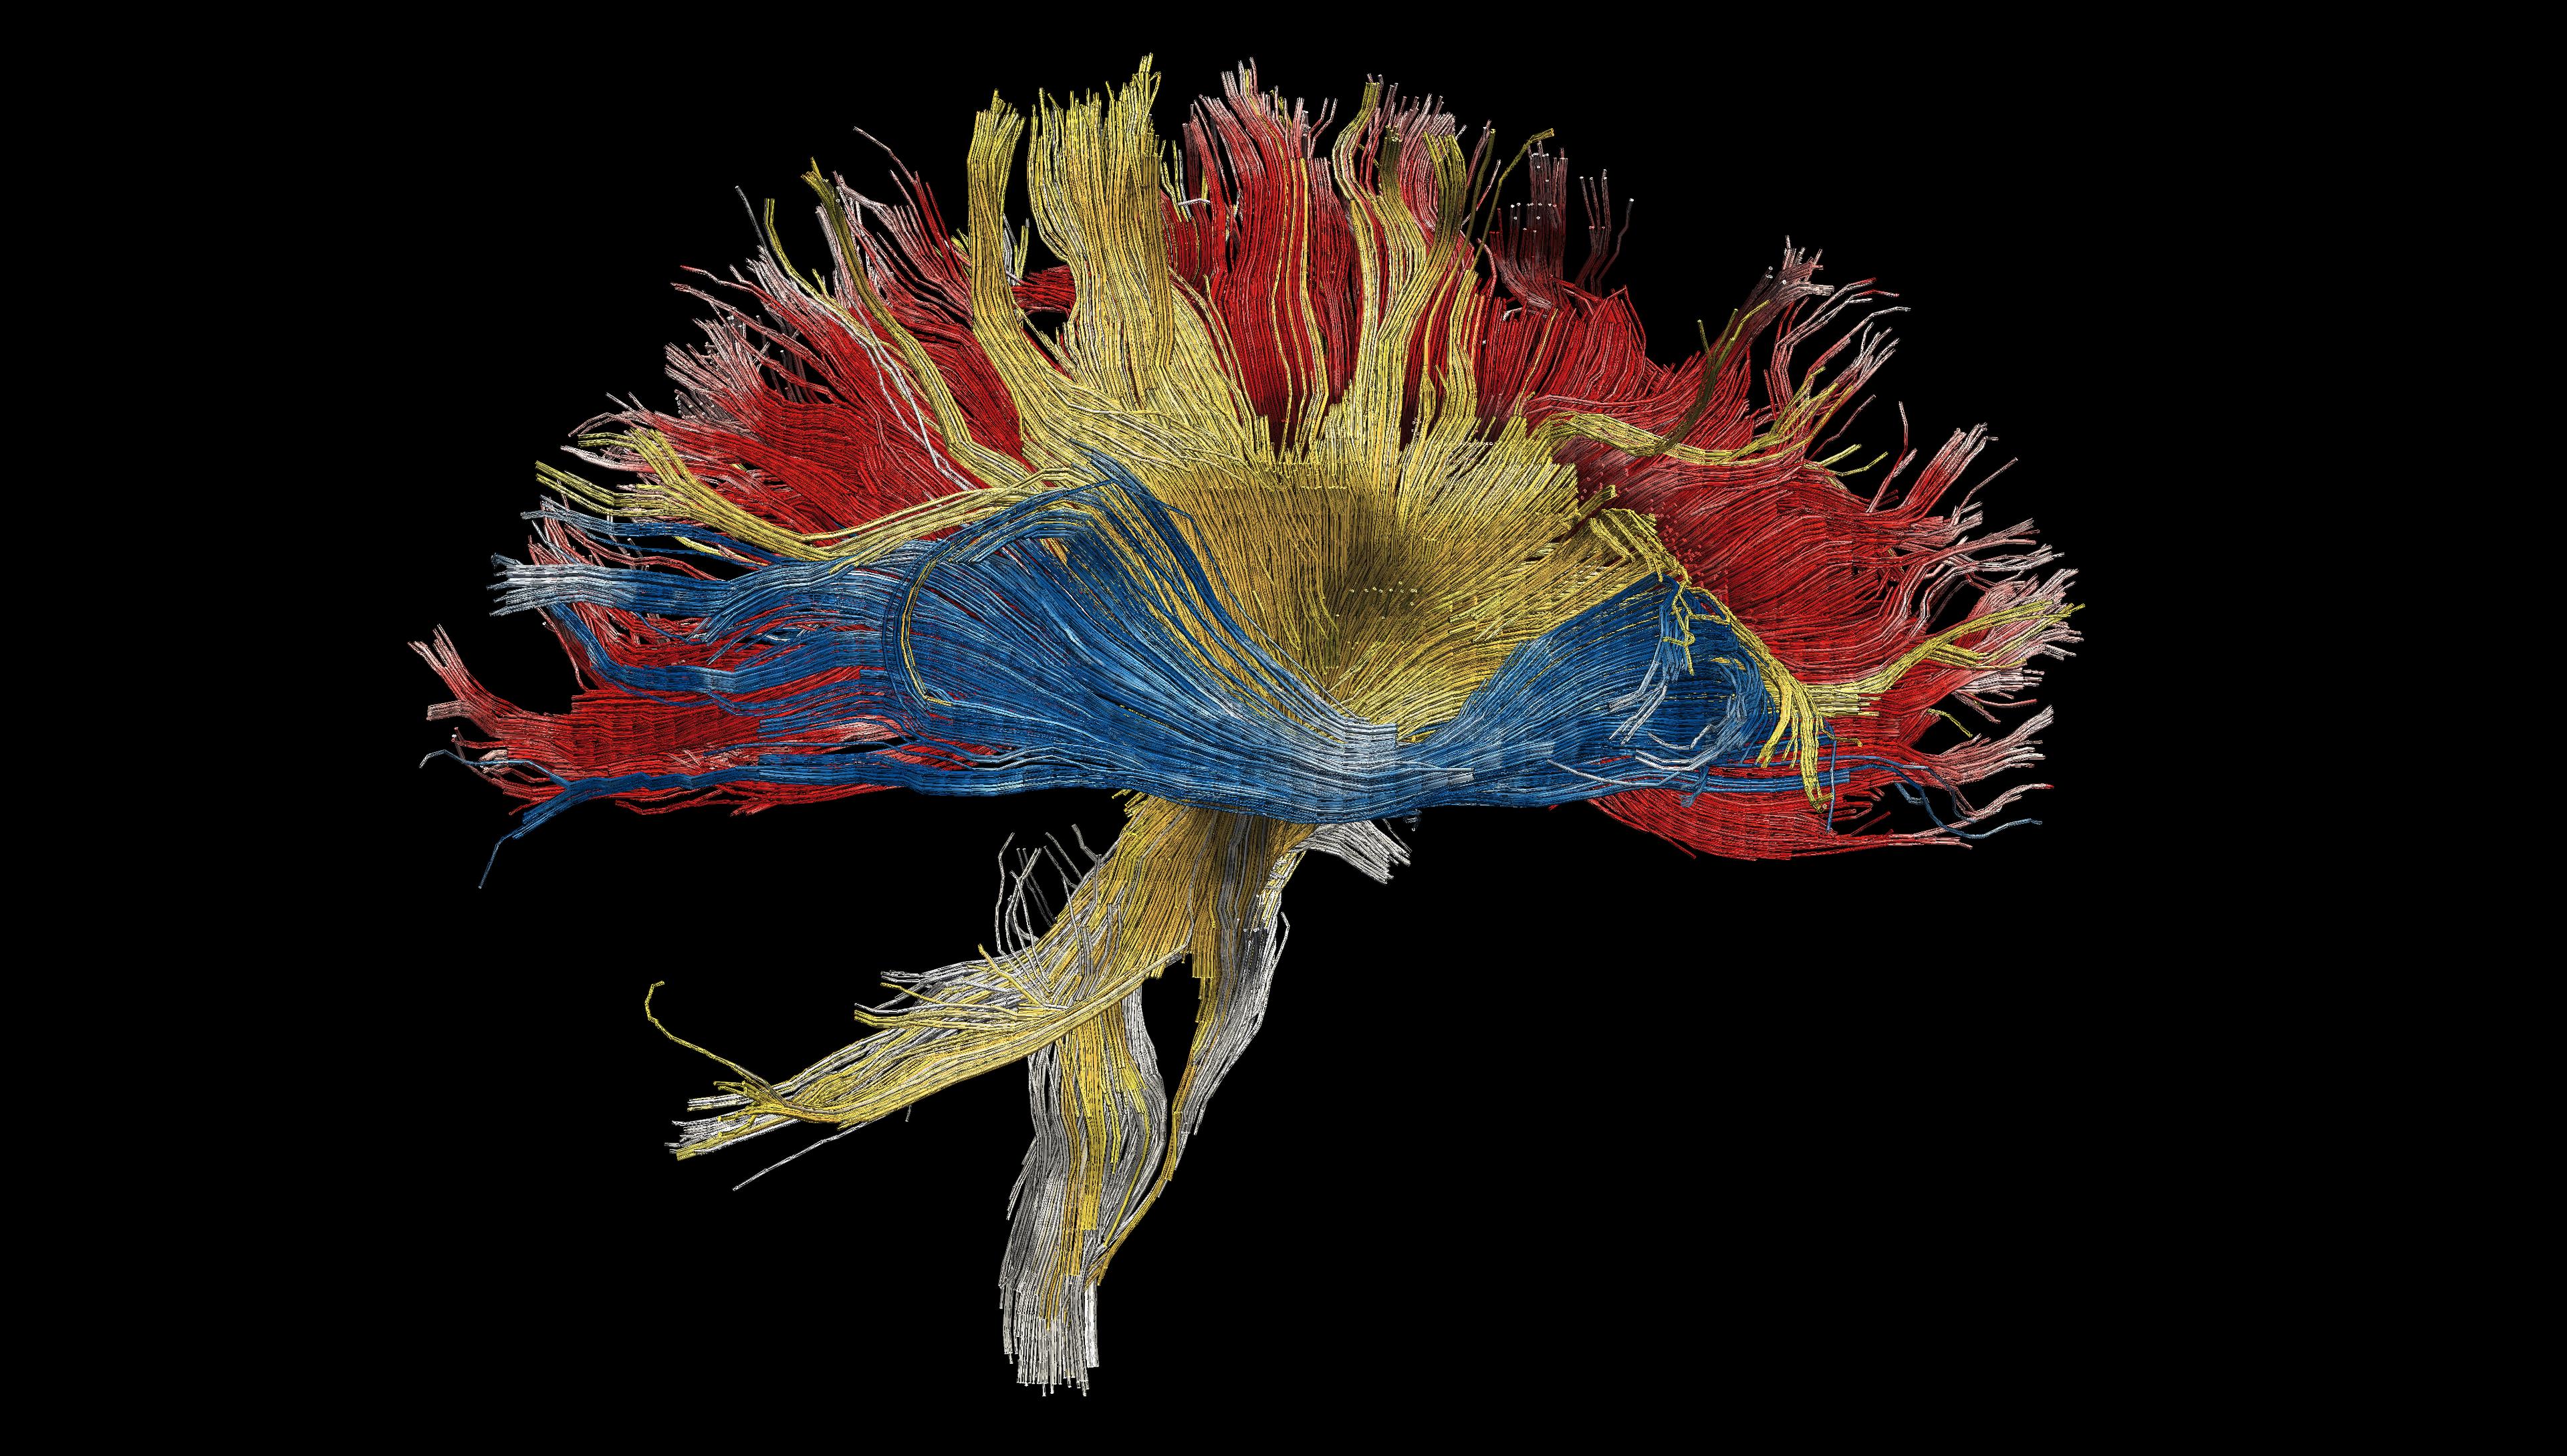 Imaging can reveal the flow of information in the brain: MRI-based imaging of six of the major white matter pathways in the human brain 